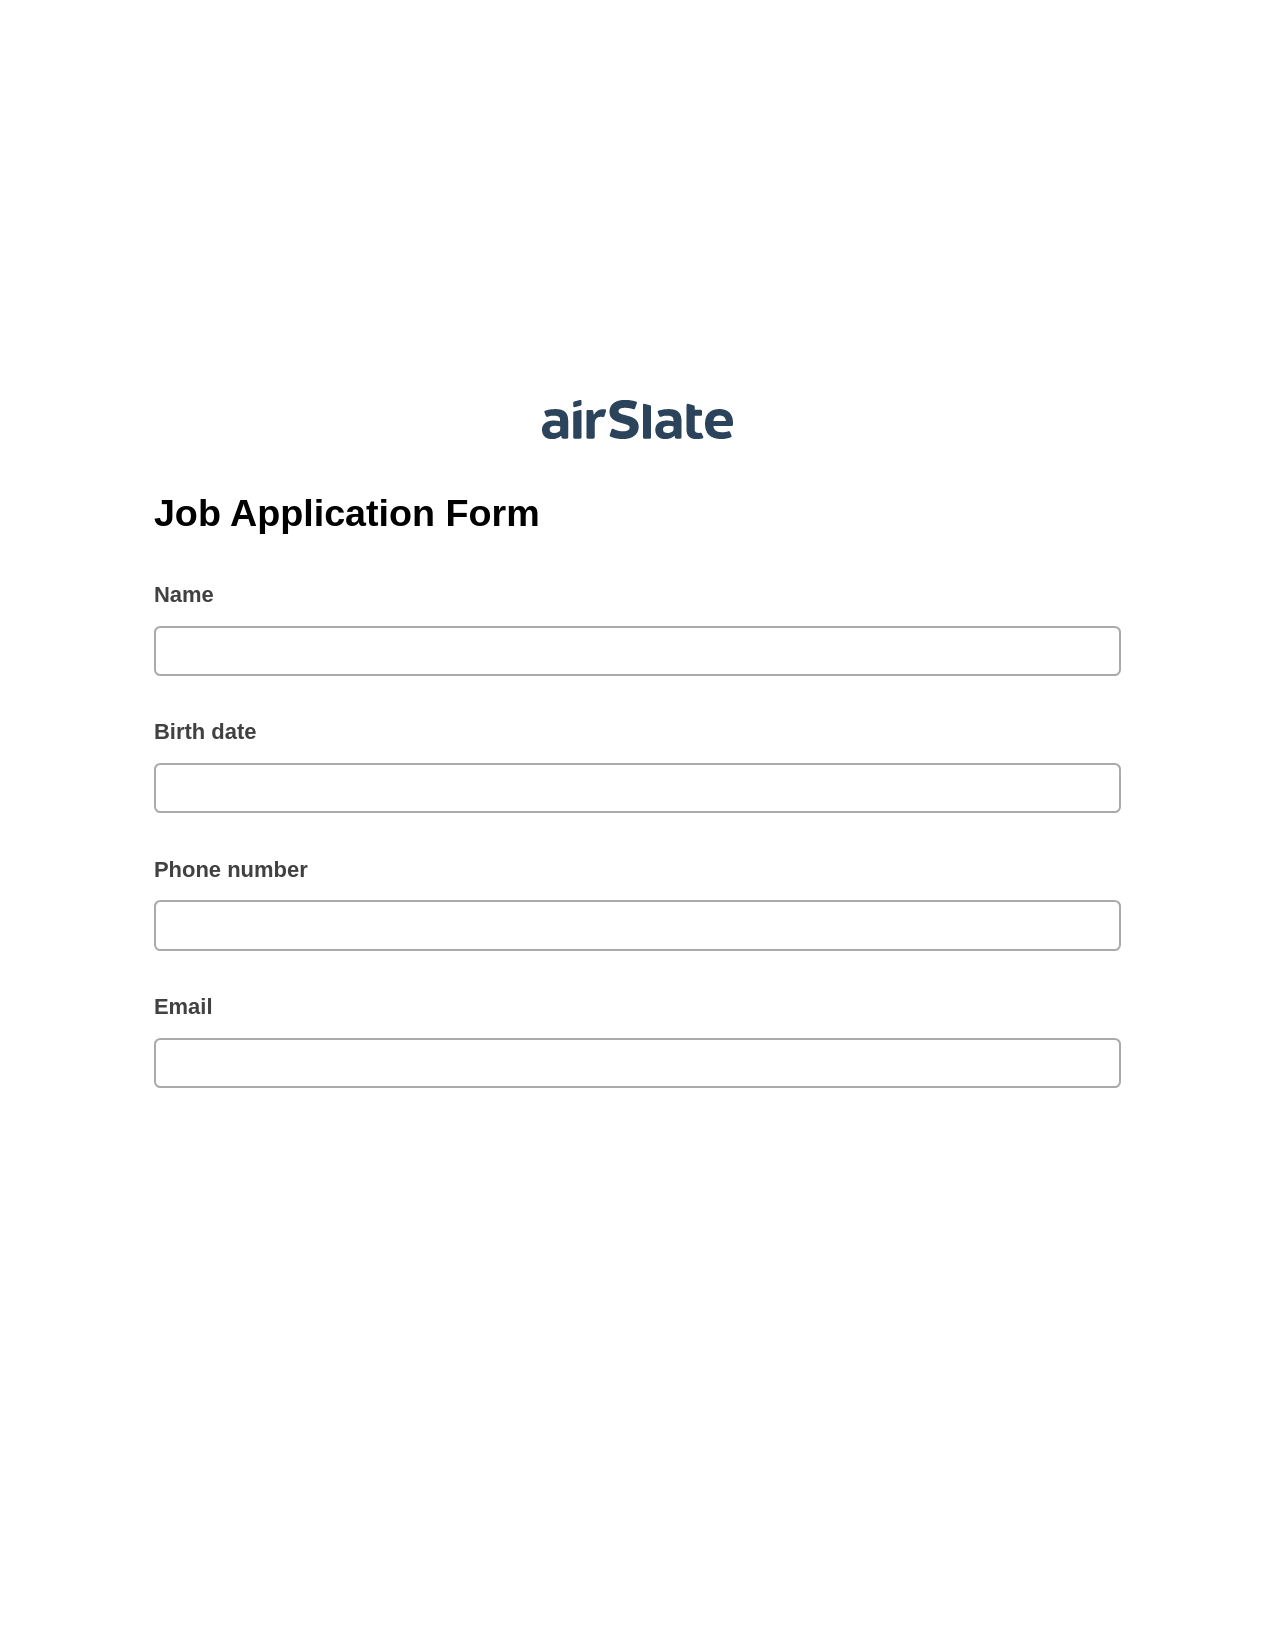 Job Application Form Pre-fill from Salesforce Record Bot, Create MS Dynamics 365 Records Bot, Box Bot